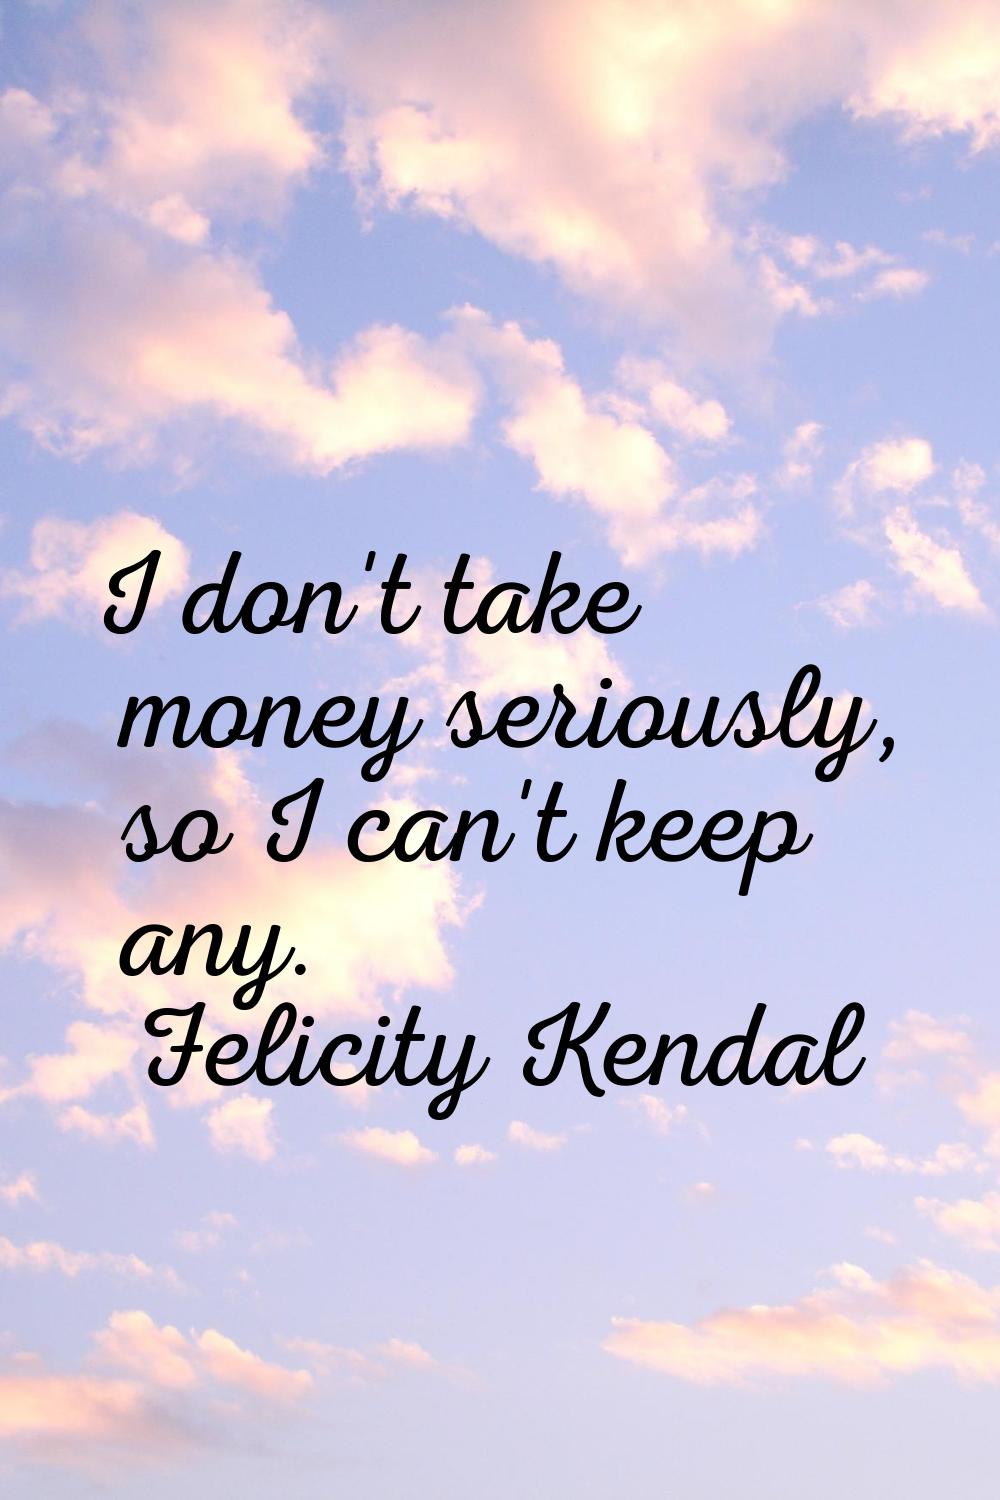 I don't take money seriously, so I can't keep any.